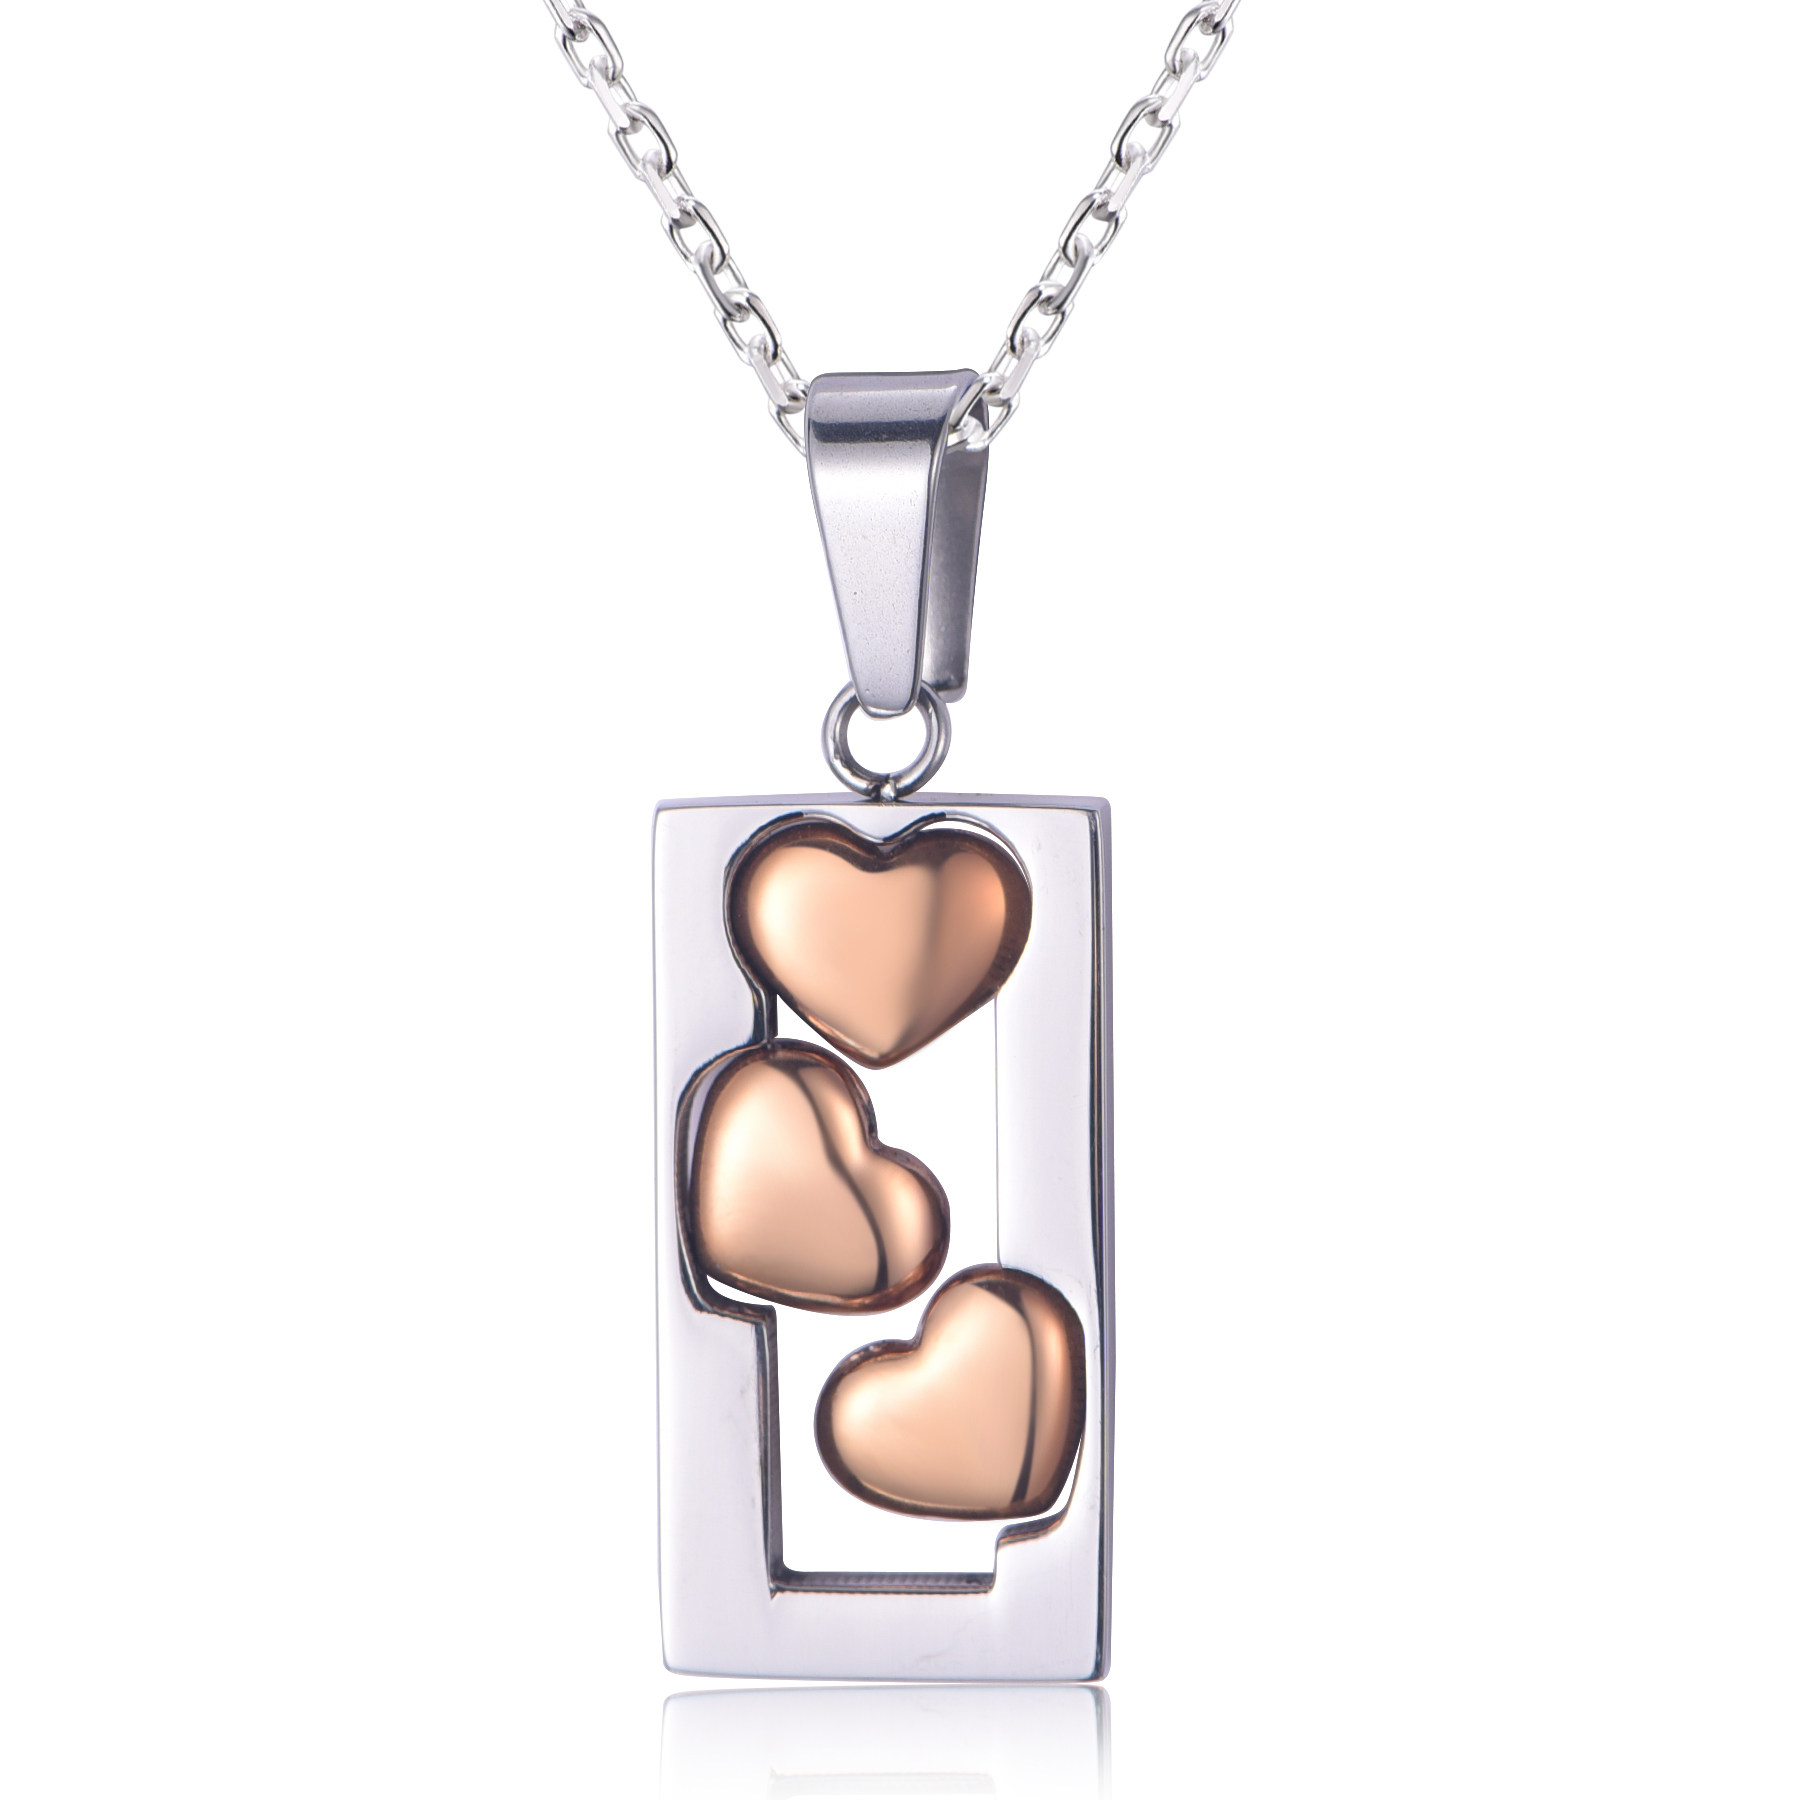 Personalized Stainless Steel Heart Rectangle Tag Necklace NJ-03